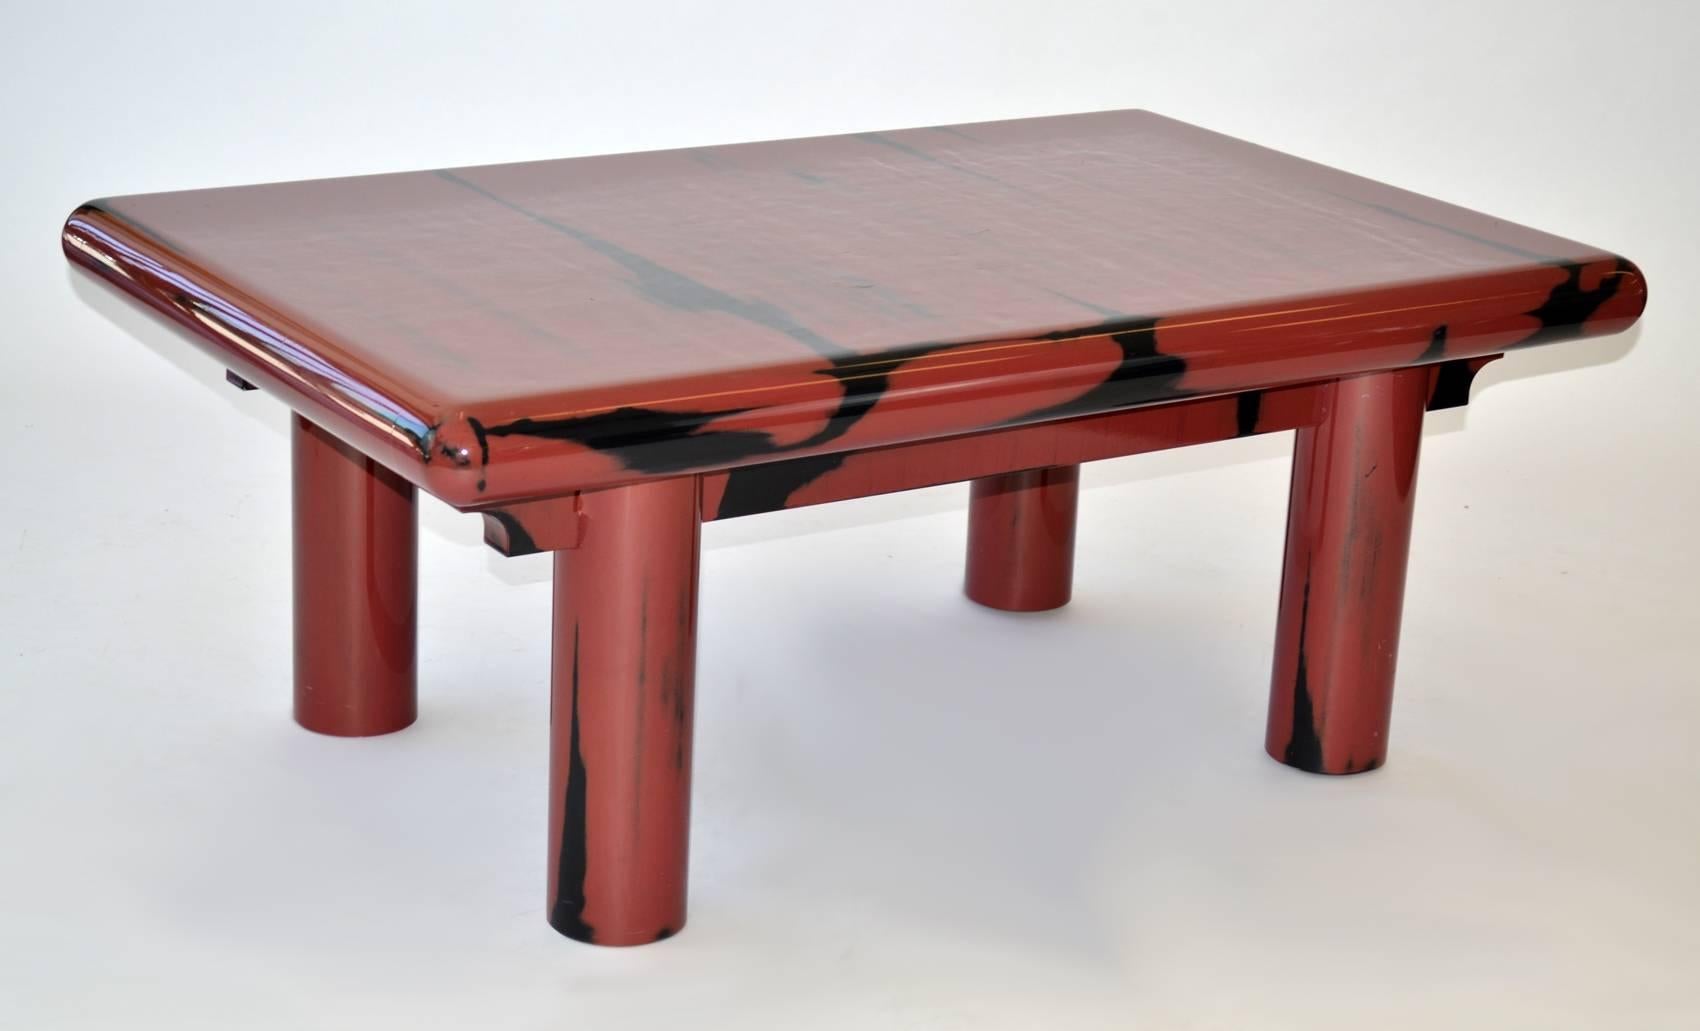 Cocktail Coffee Table Post Modern Lacquer after Karl Springer 1980's. Sturdy, handsome thickly lacquered coffee table with curved construction reminiscent of the Karl Springer Kytoto table. Currant red with black accents. A striking piece of